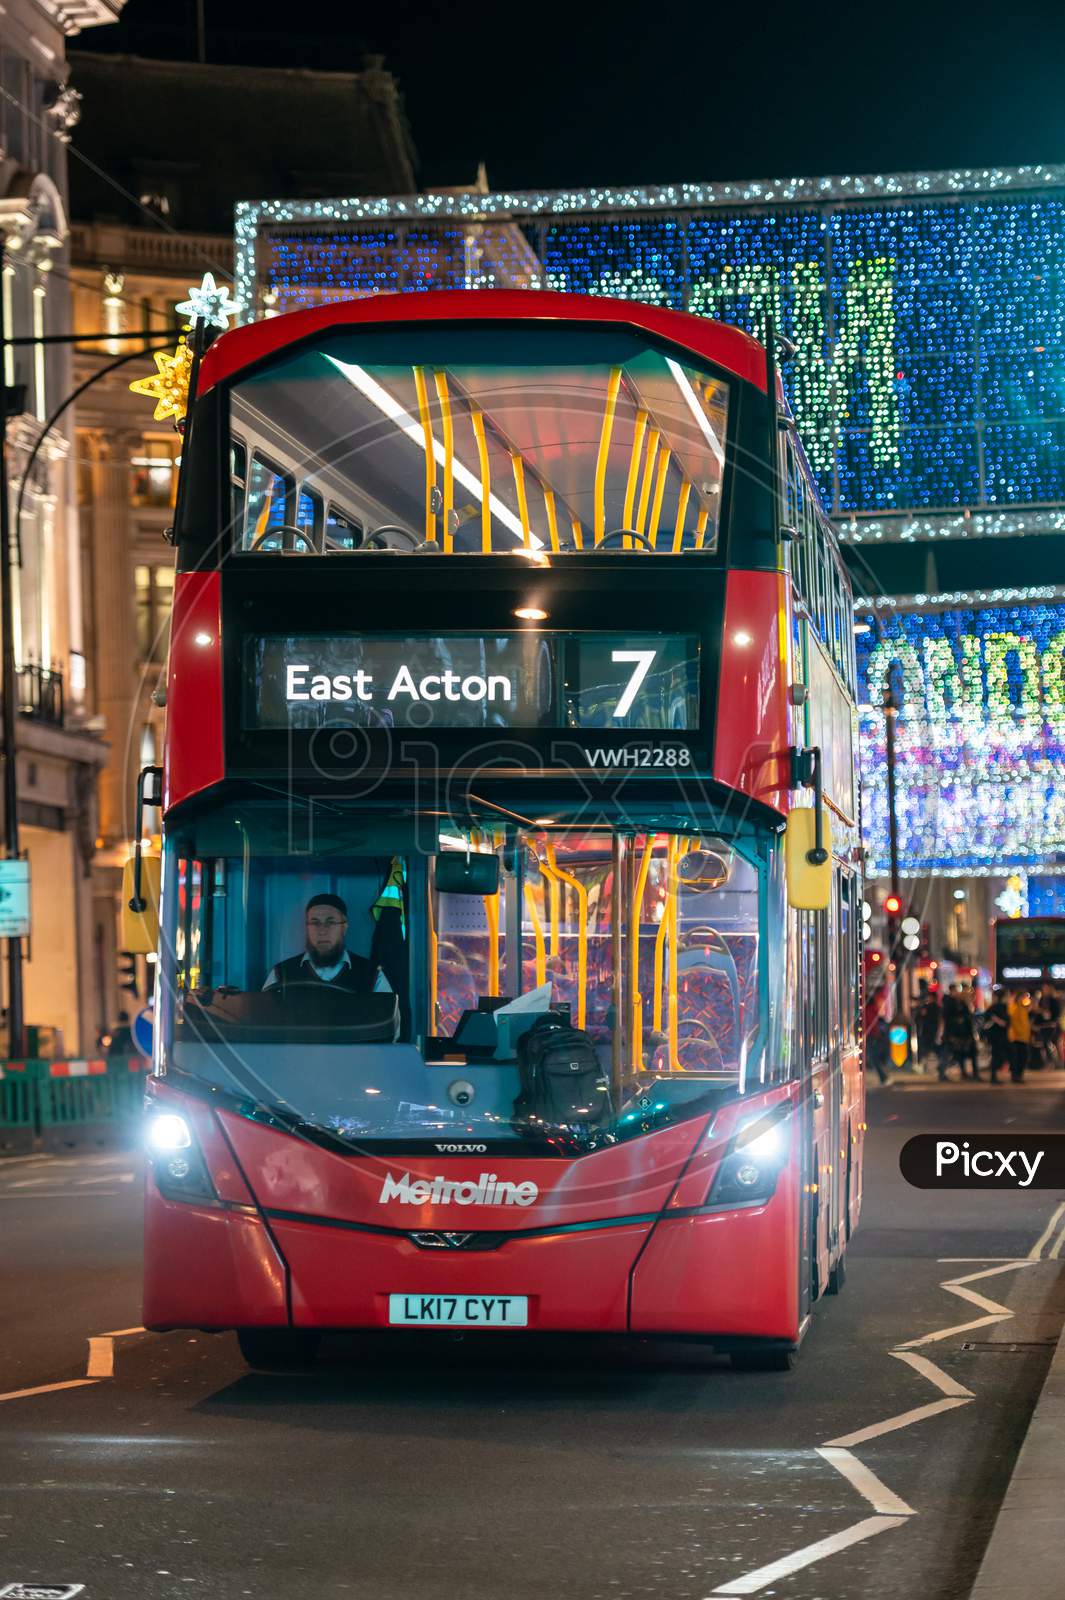 Red London Double Decker Bus With Oxford Street Illuminated Christmas Decorations In The Background